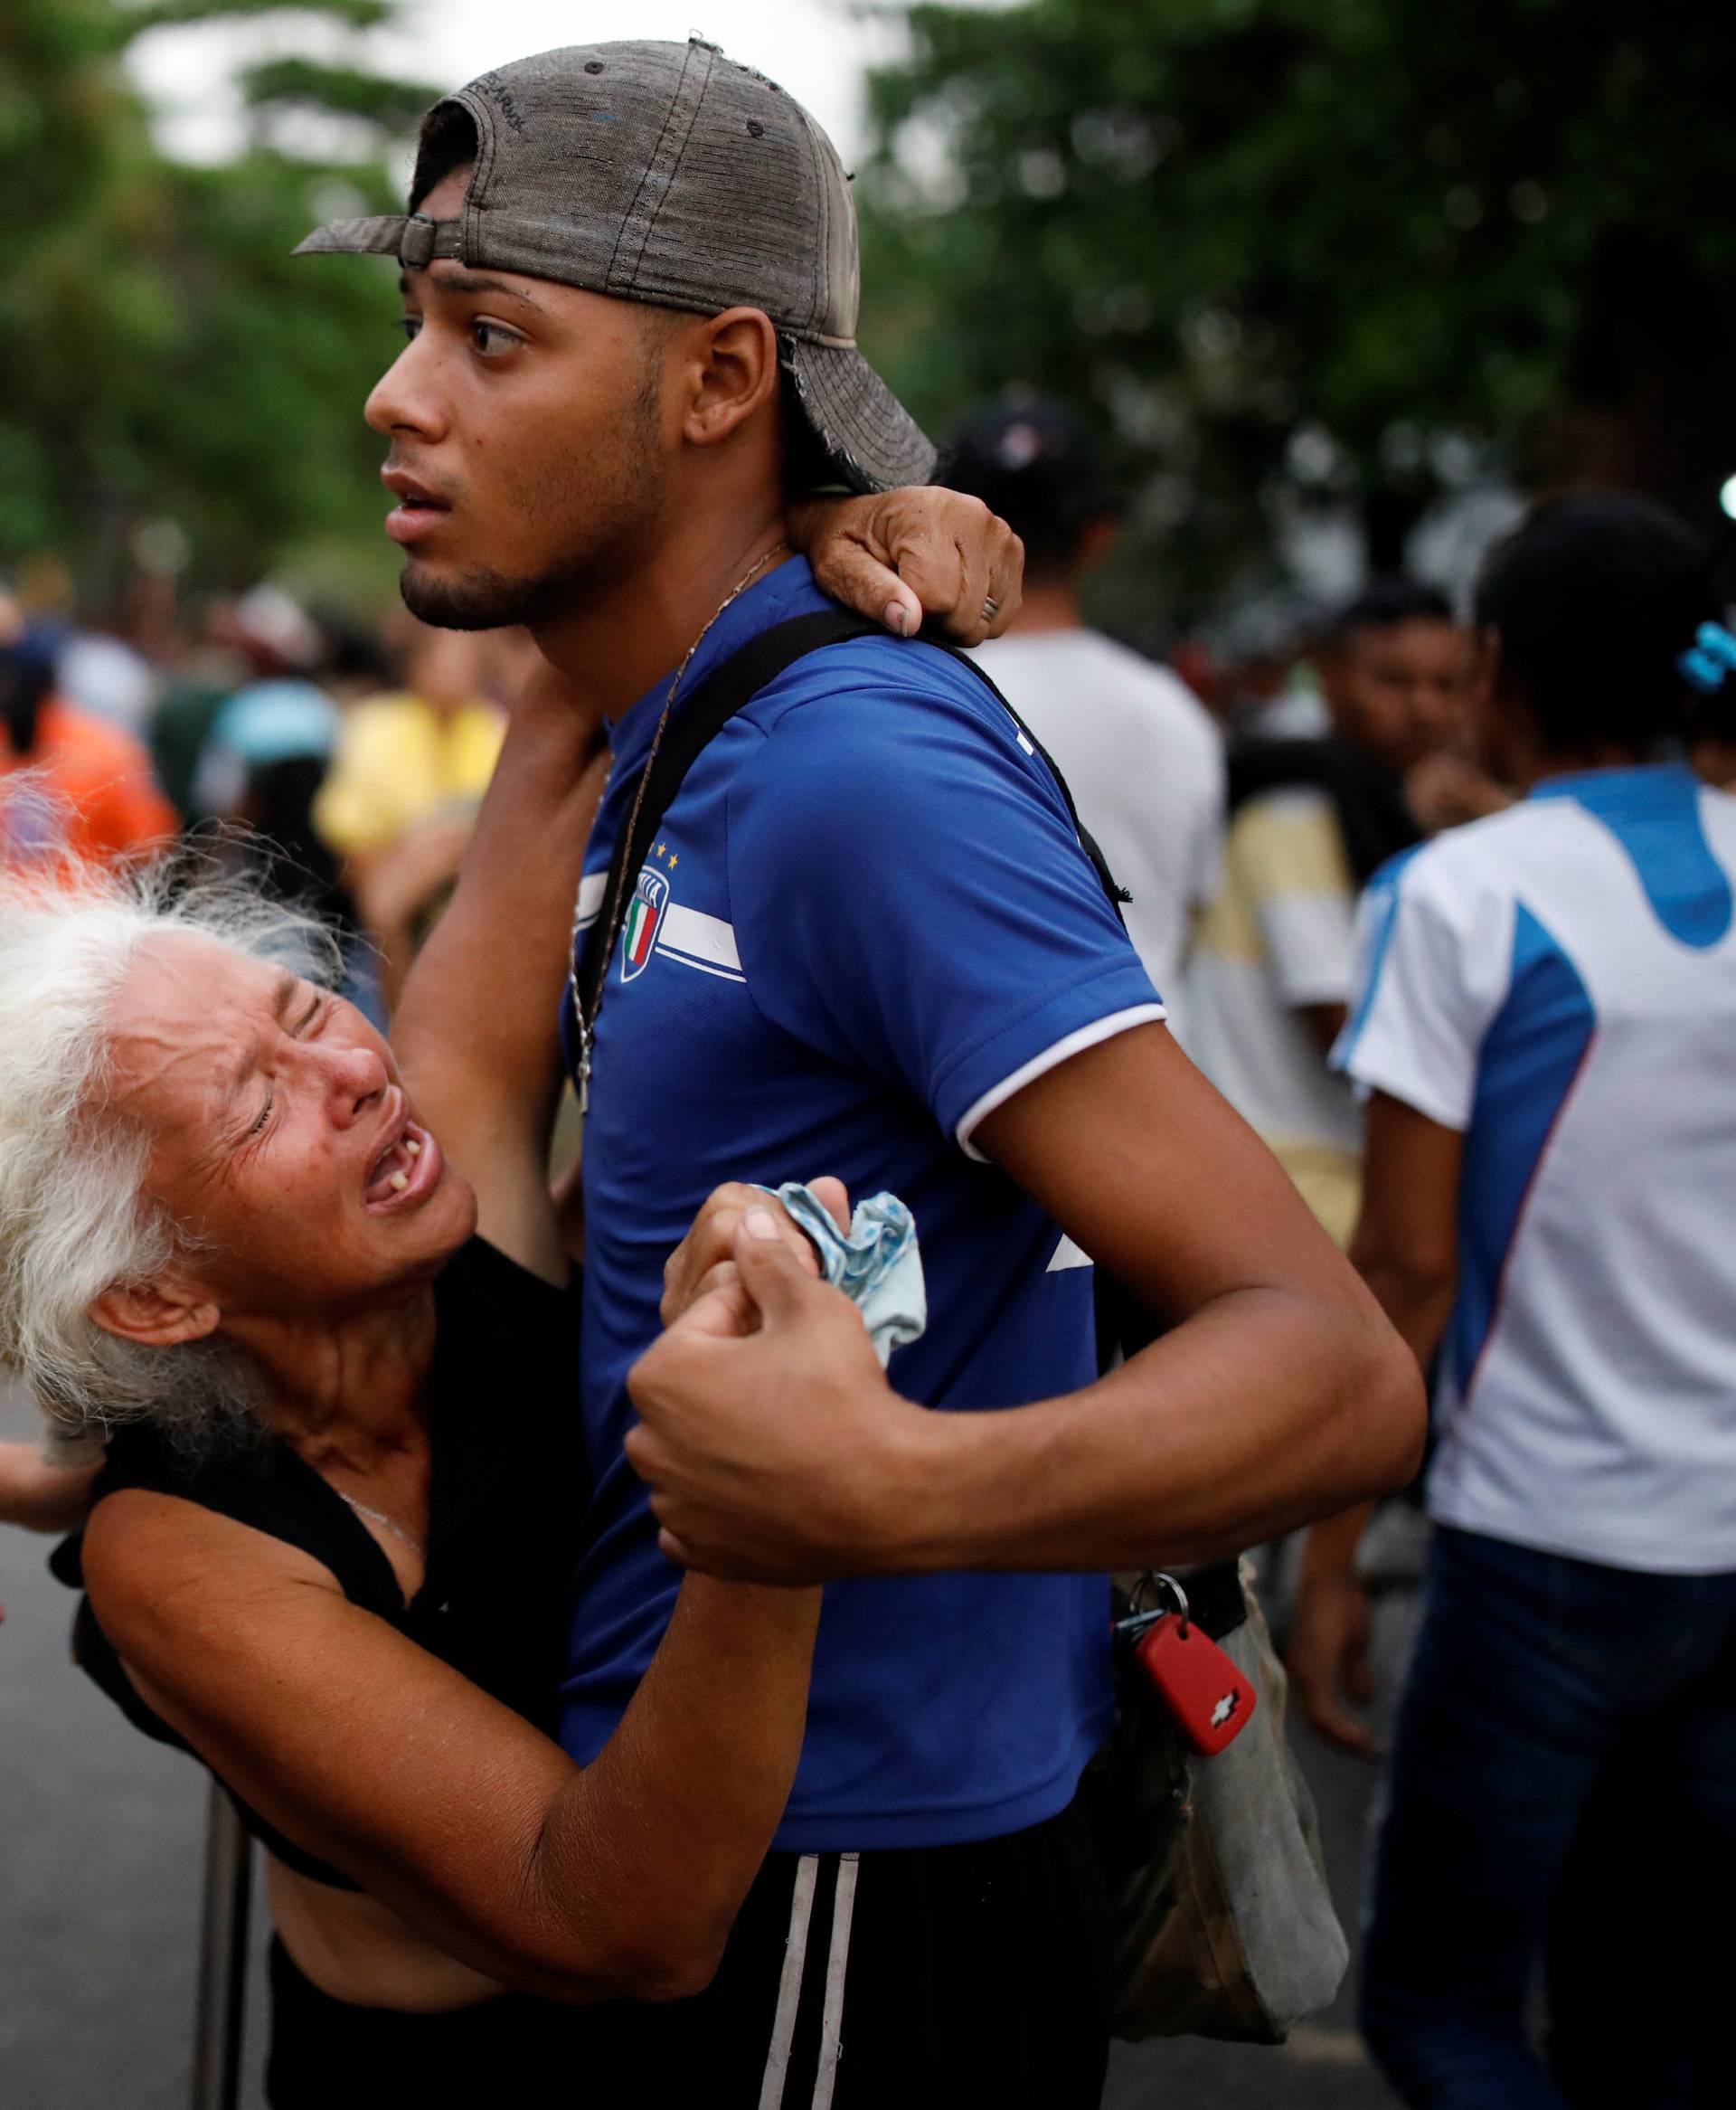 Relatives of inmates held at the General Command of the Carabobo Police react as they wait outside the prison where a fire occurred in Valencia